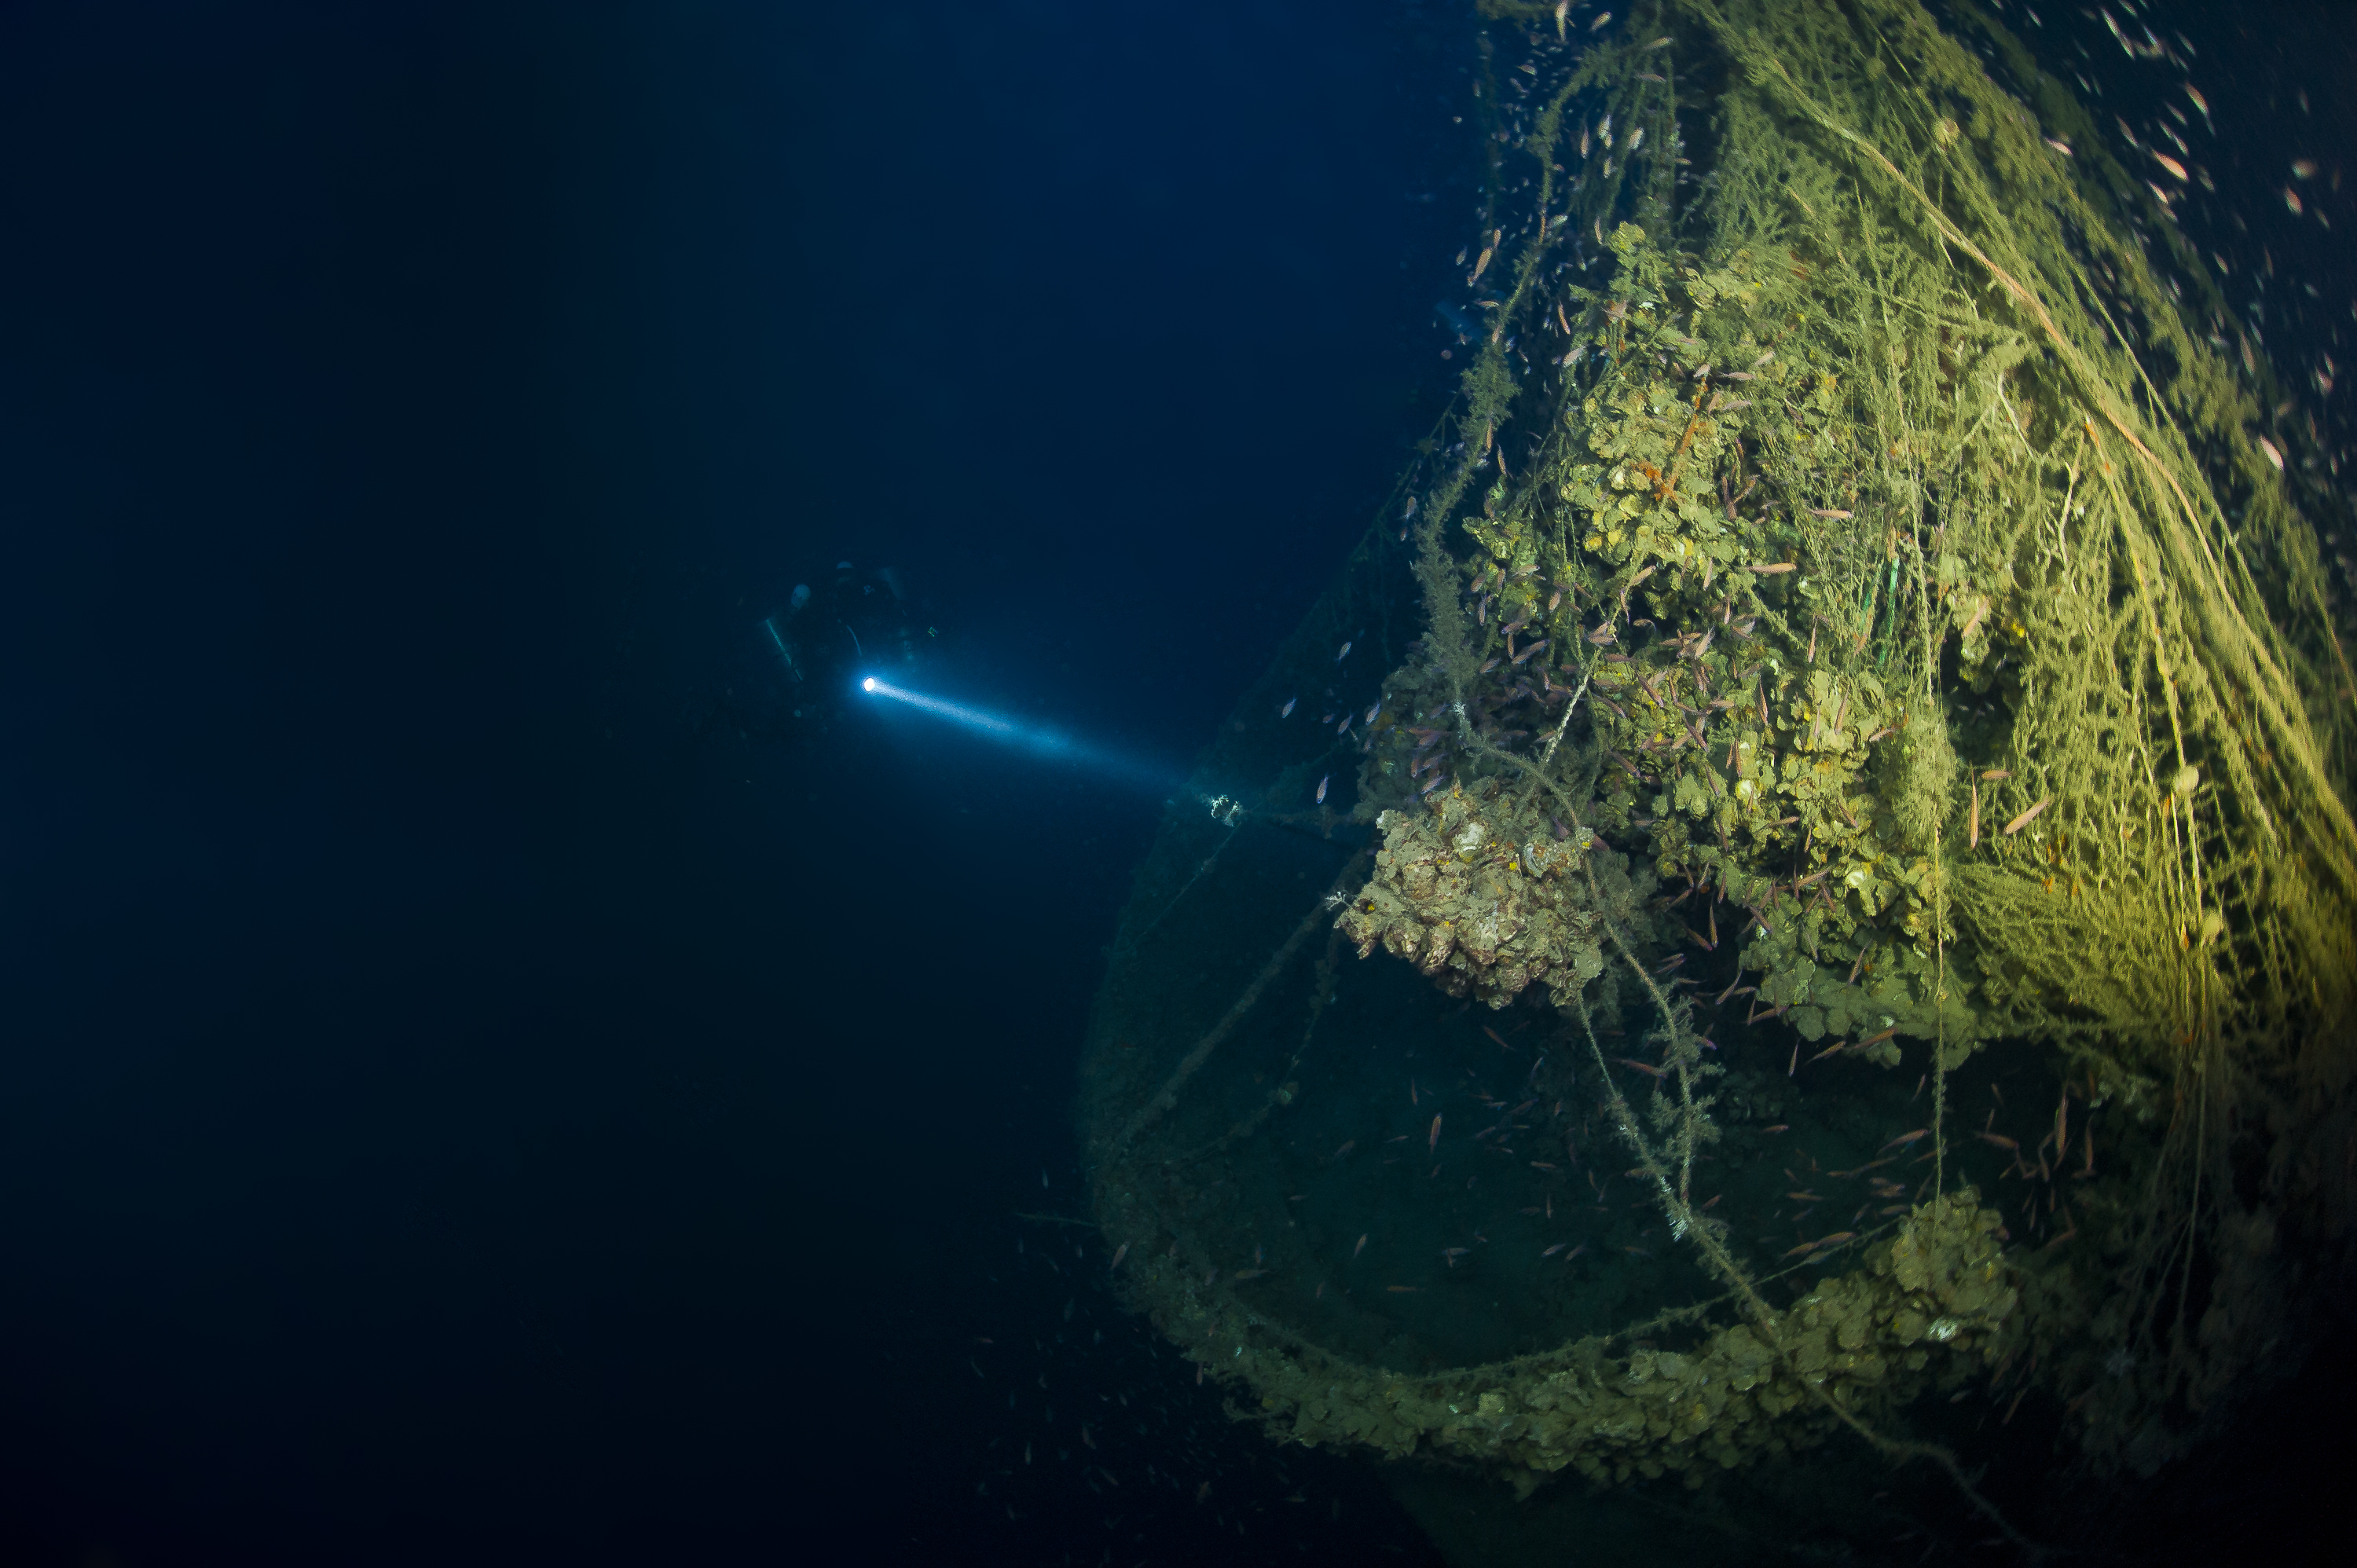 At 98m, on the wreck's stern, a Flak 38 anti-aircraft gun is hidden by fishing nets. Photo by Marco Mori.